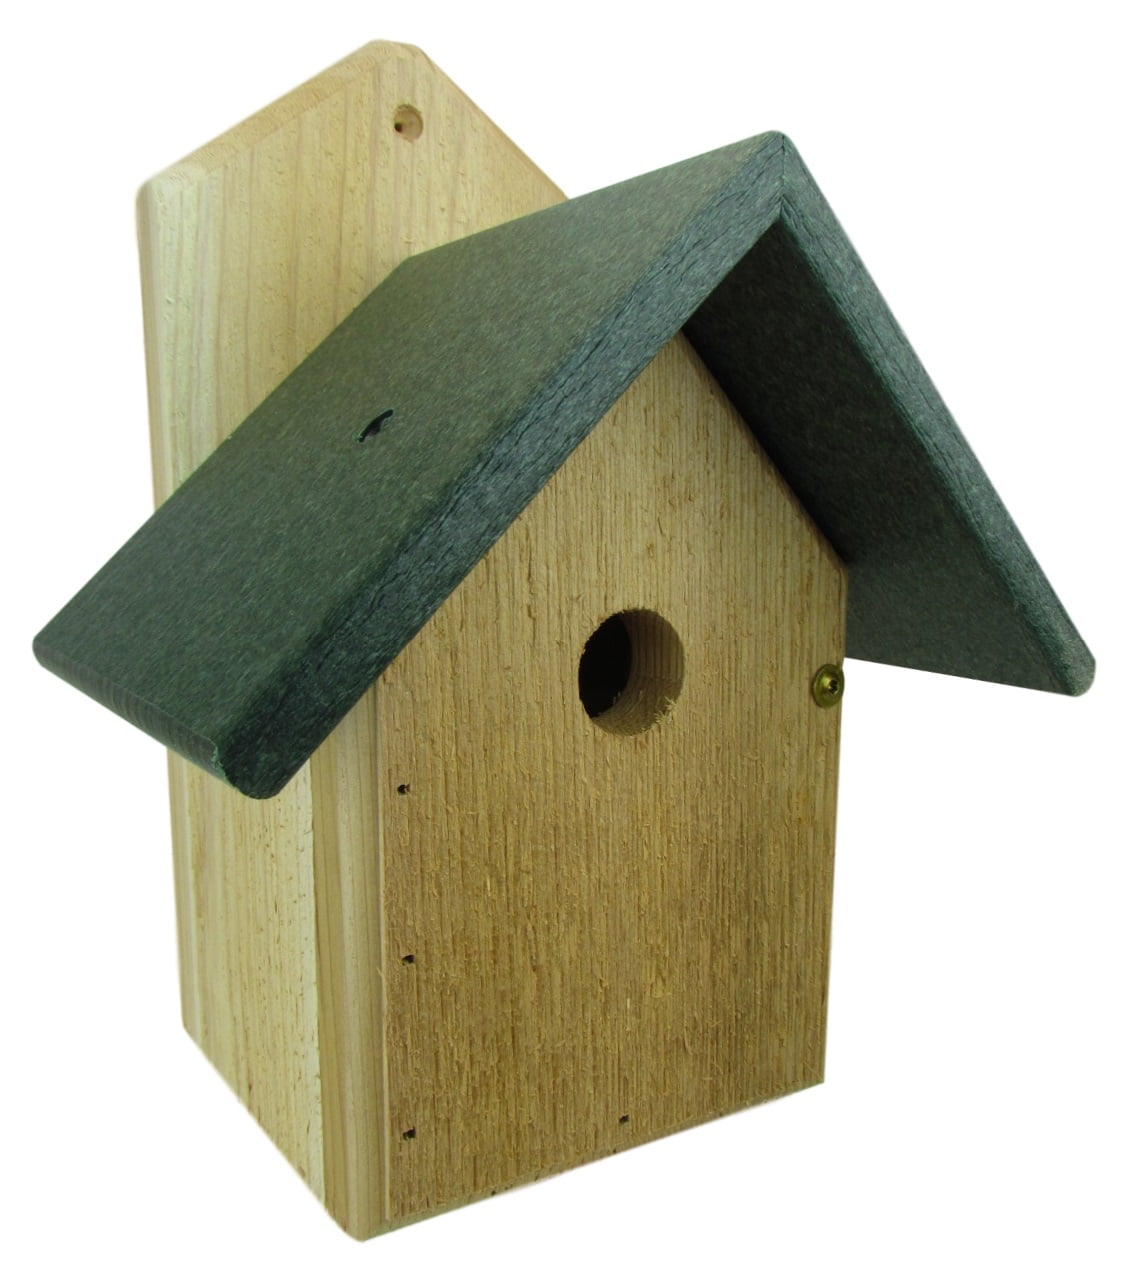 Green Recycled Poly Lumber Roof WREN-4G Nature Products USA Chickadee Birdhouse 